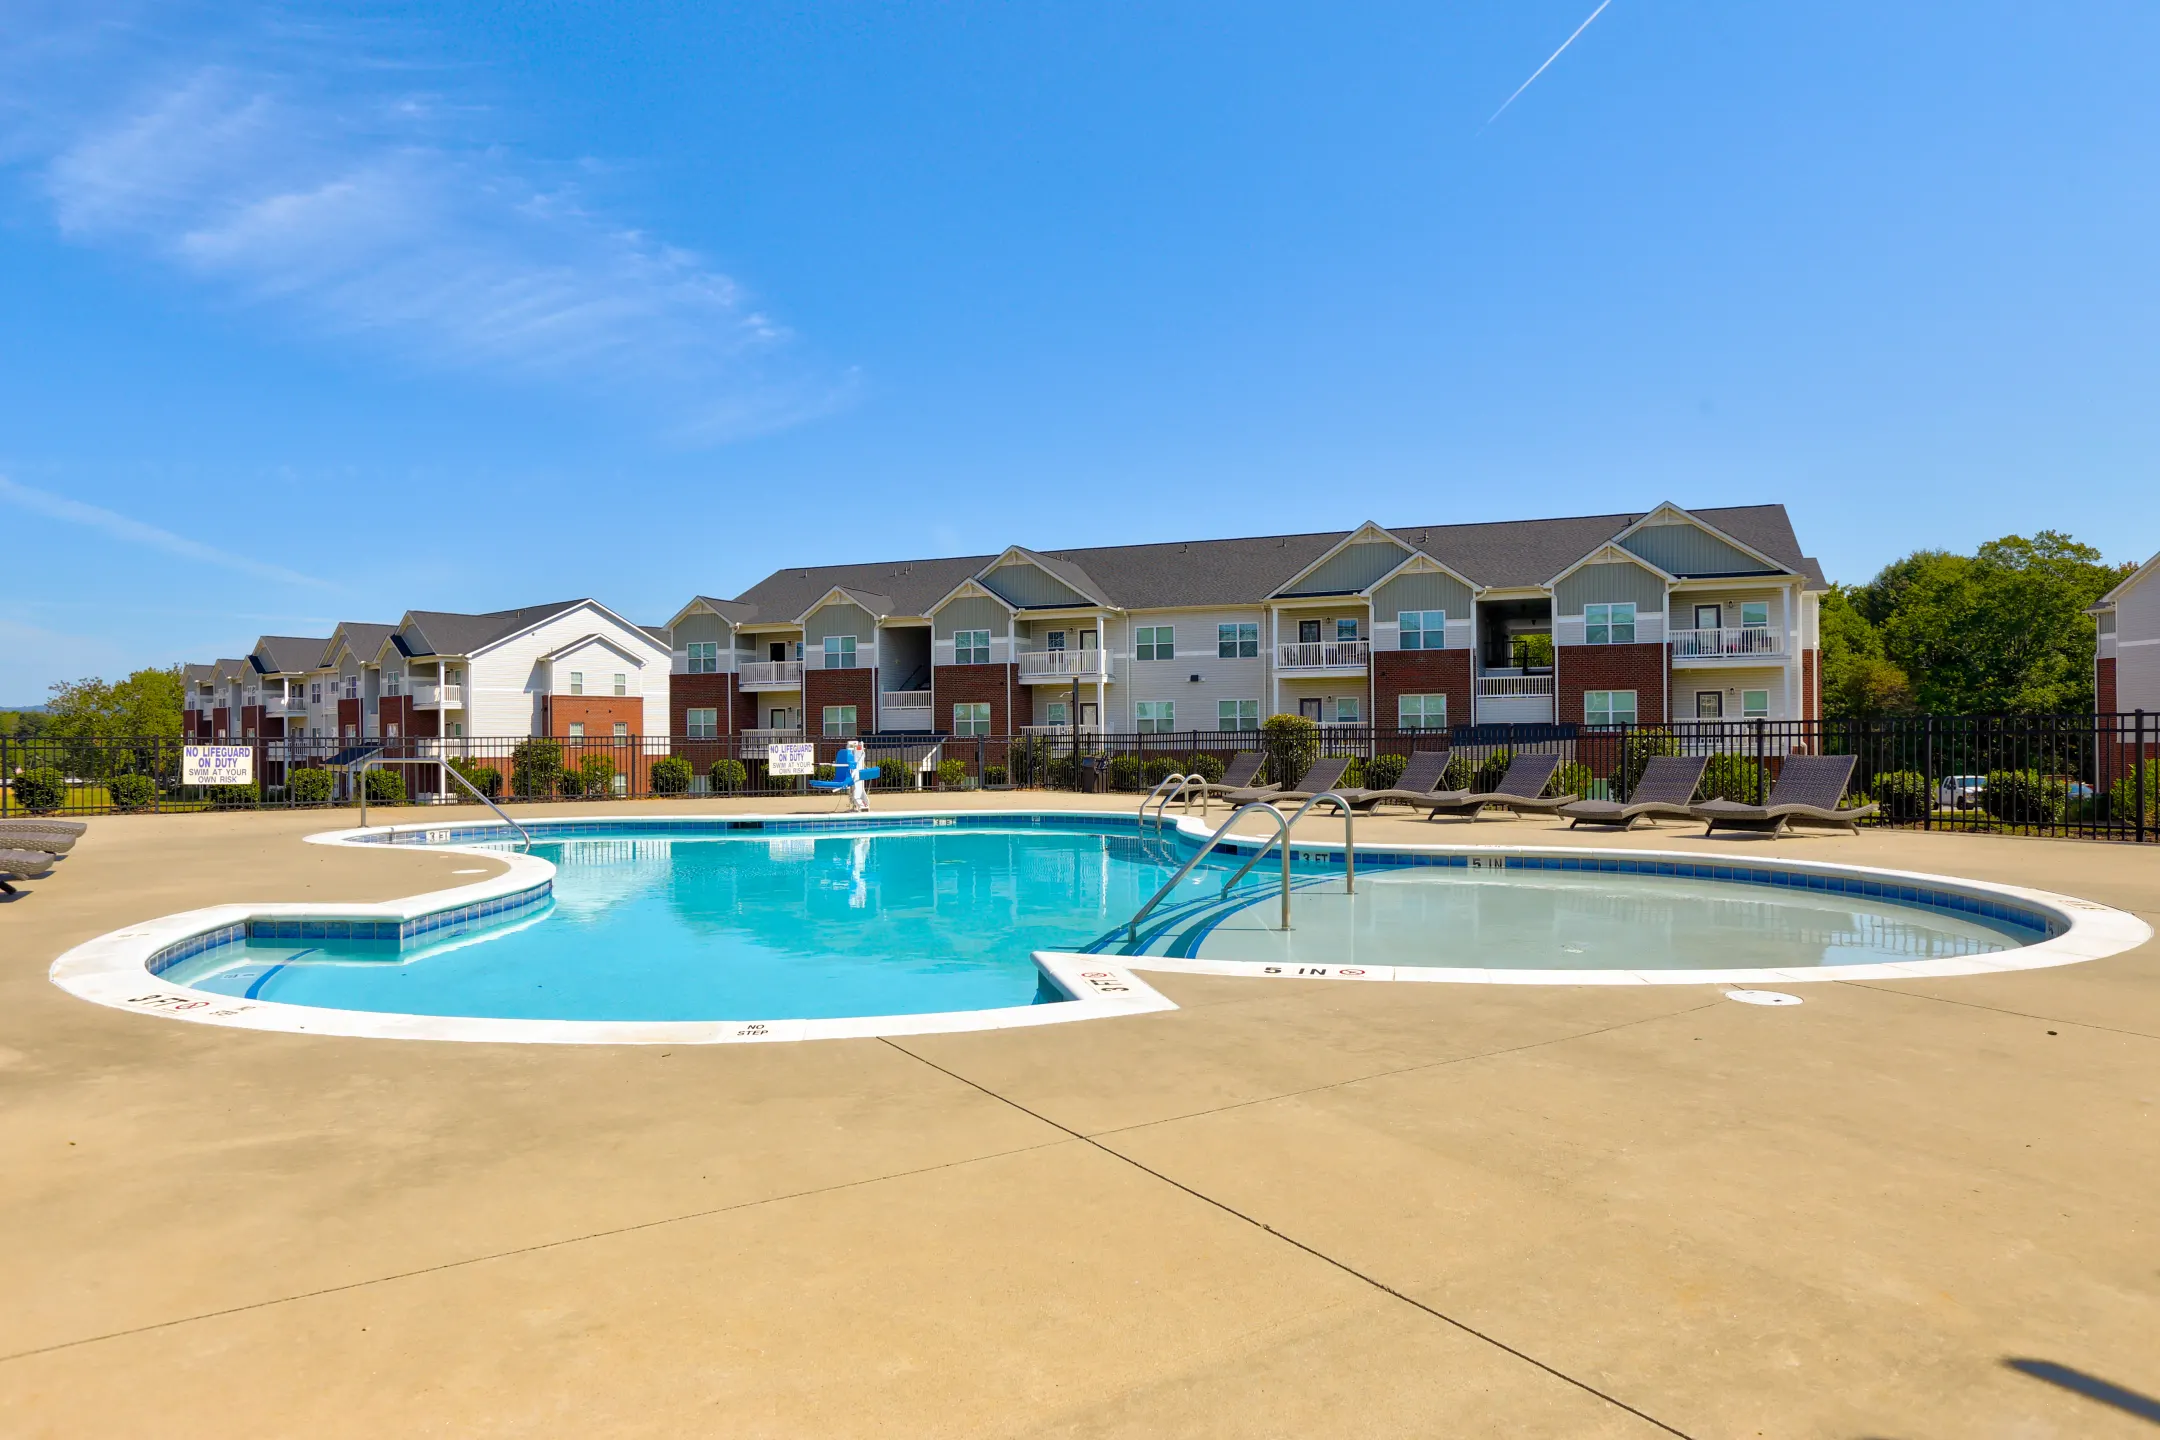 Pool - Assembly Apartments - Greenville, SC